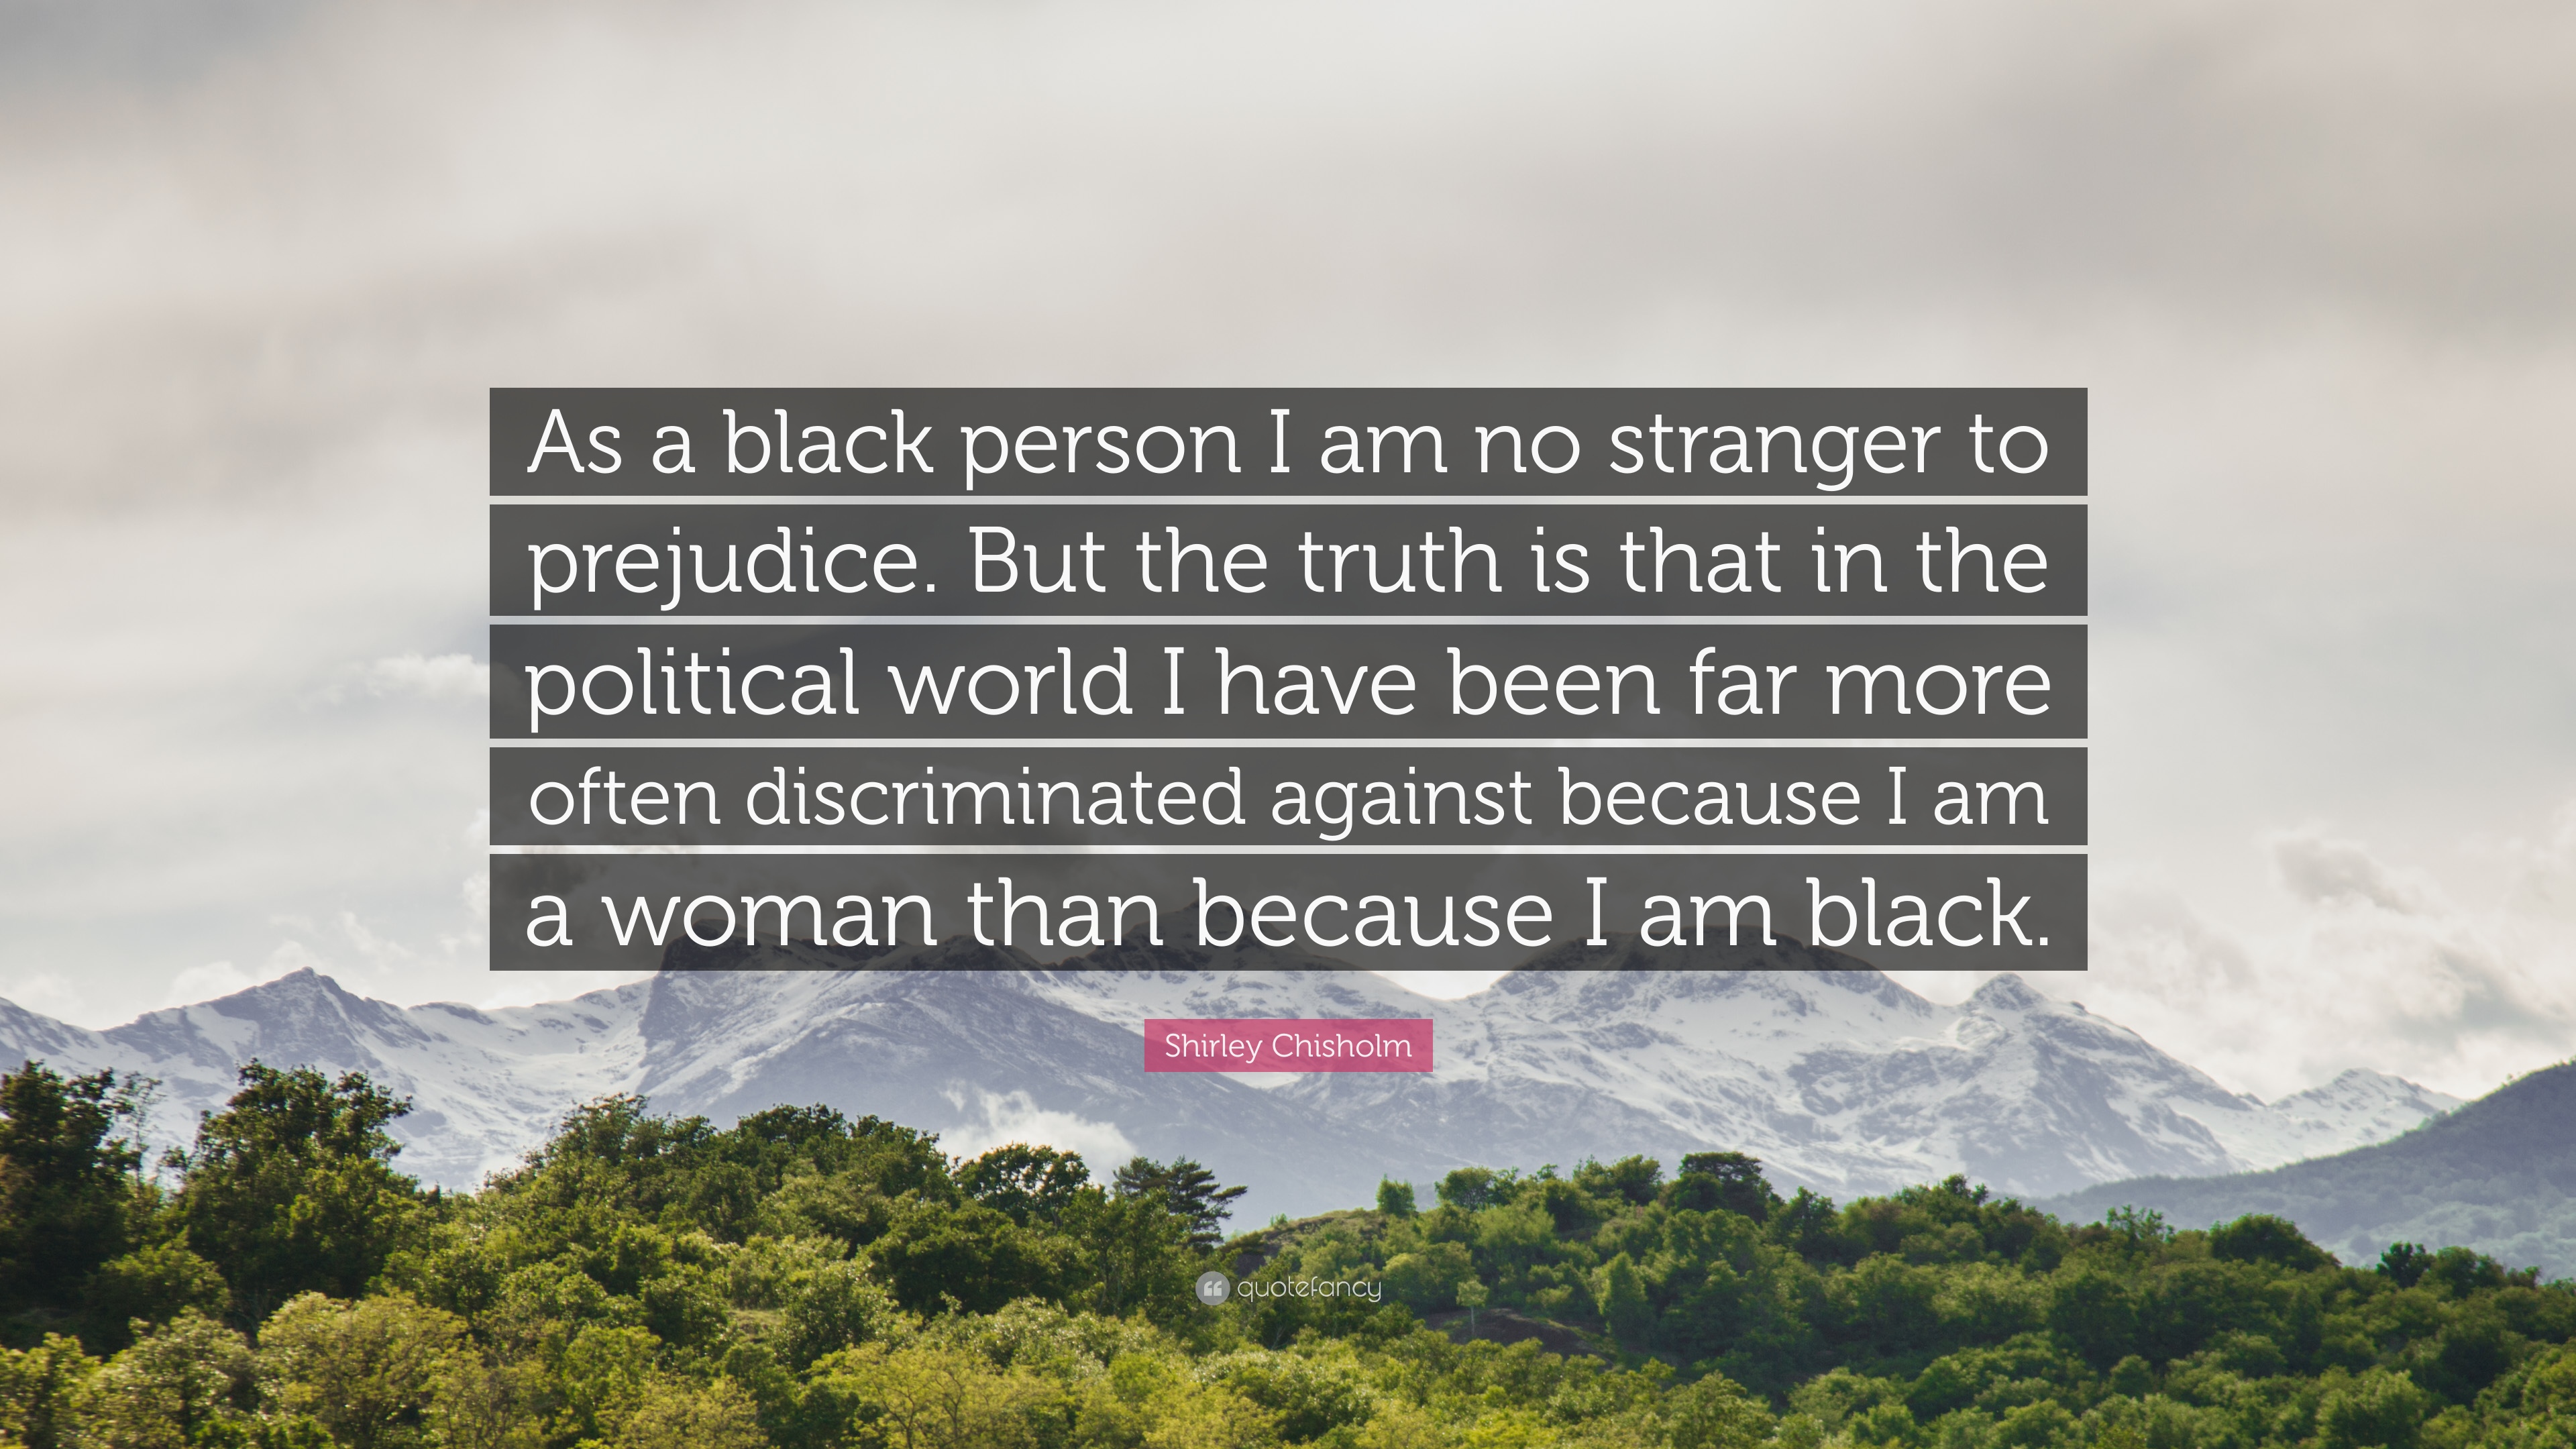 Shirley Chisholm Quote: “As a black person I am no stranger